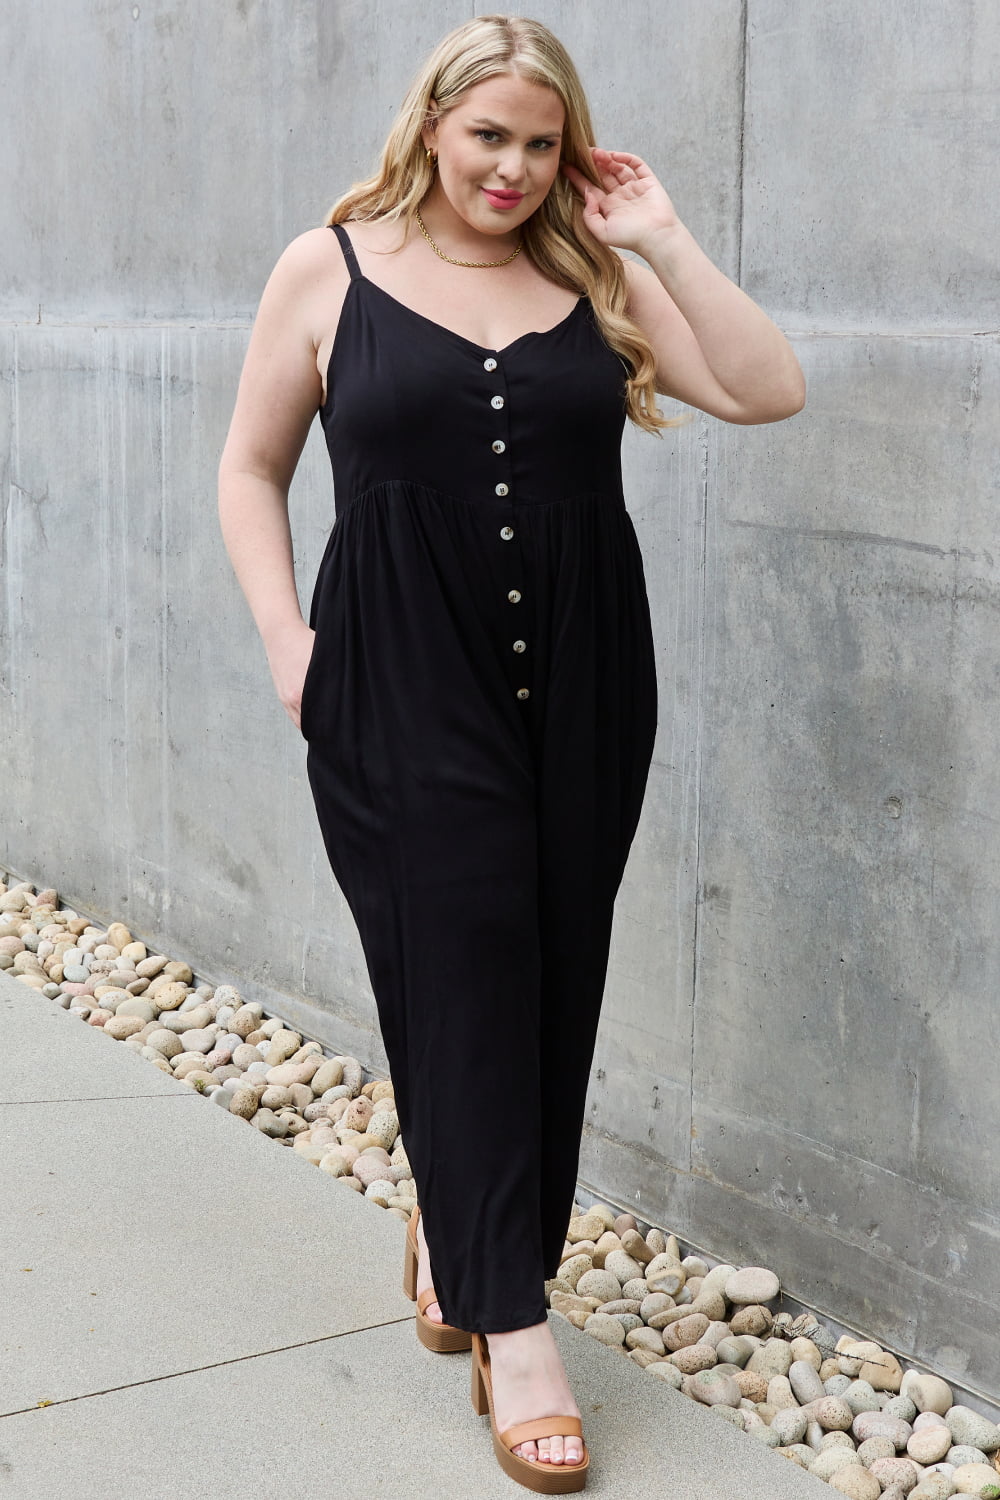 All Day Full Size Wide Leg Button Down Jumpsuit in Black - Women’s Clothing & Accessories - Jumpsuits & Rompers - 5